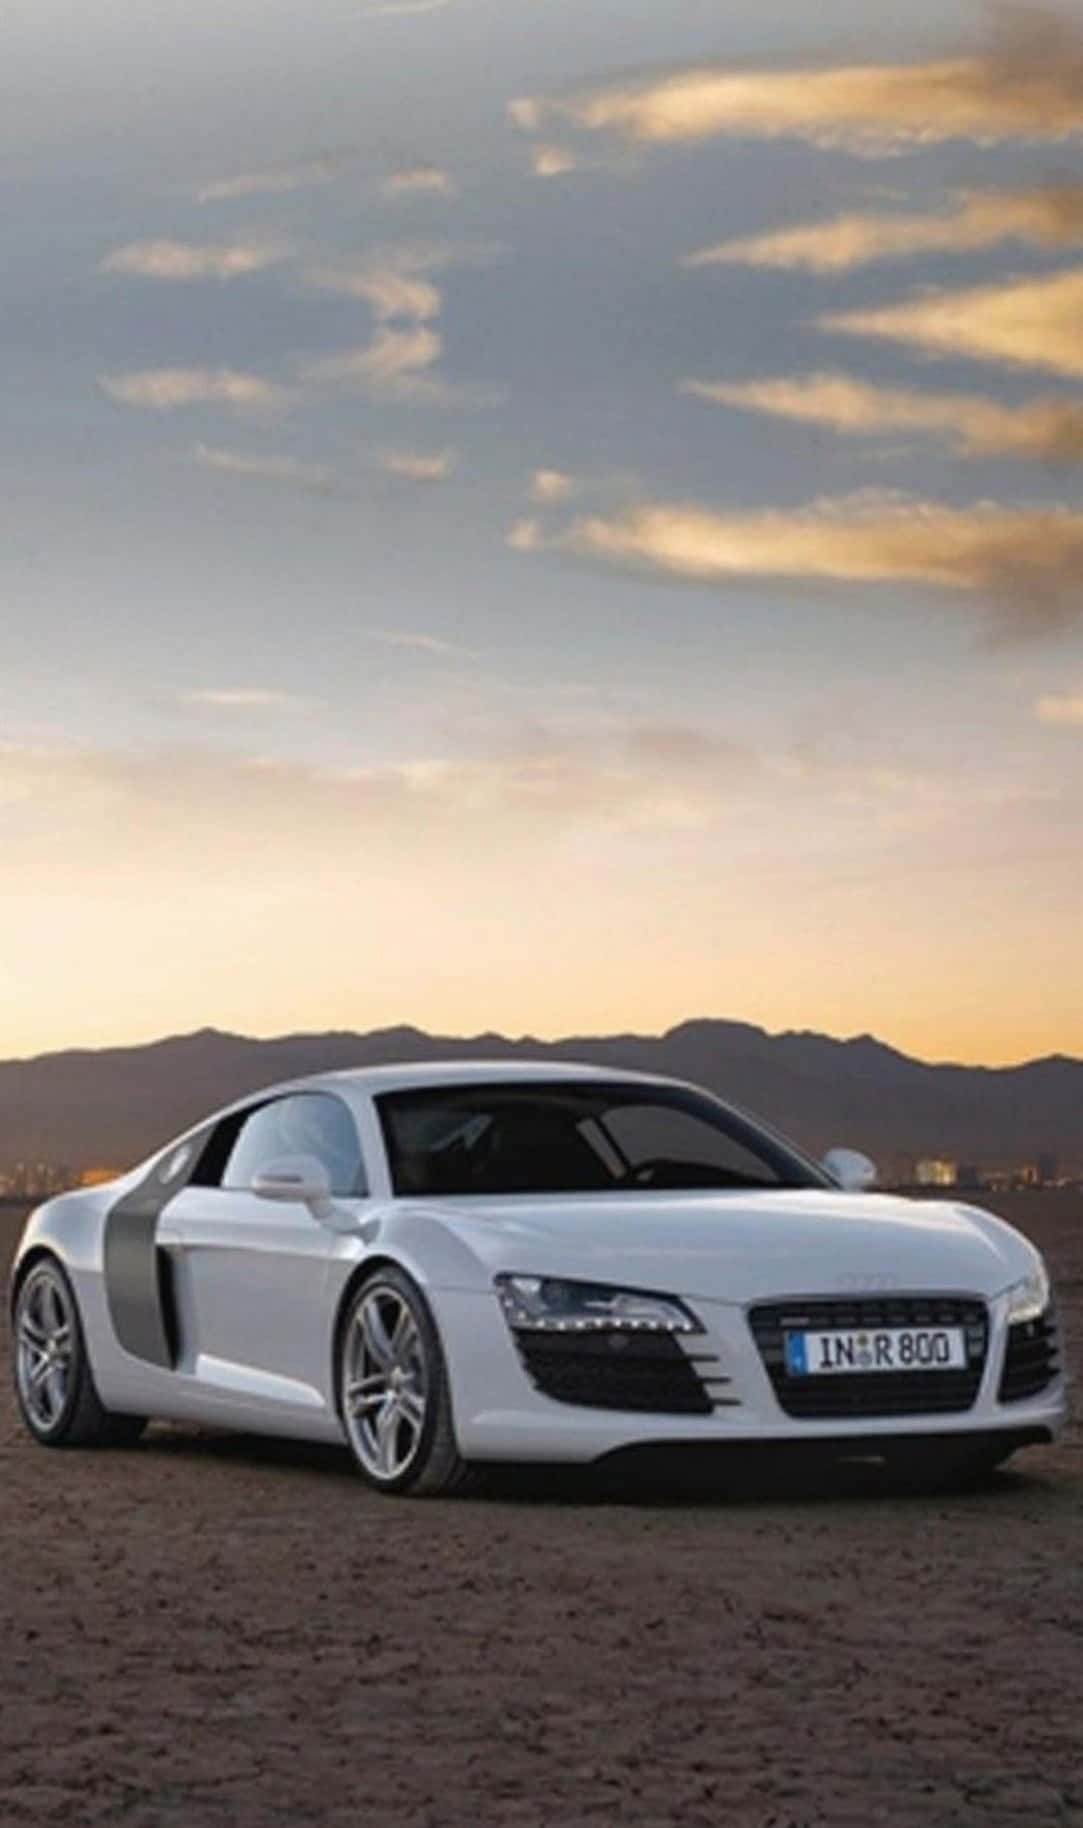 Audi R8 Car Android Sunset Wallpaper